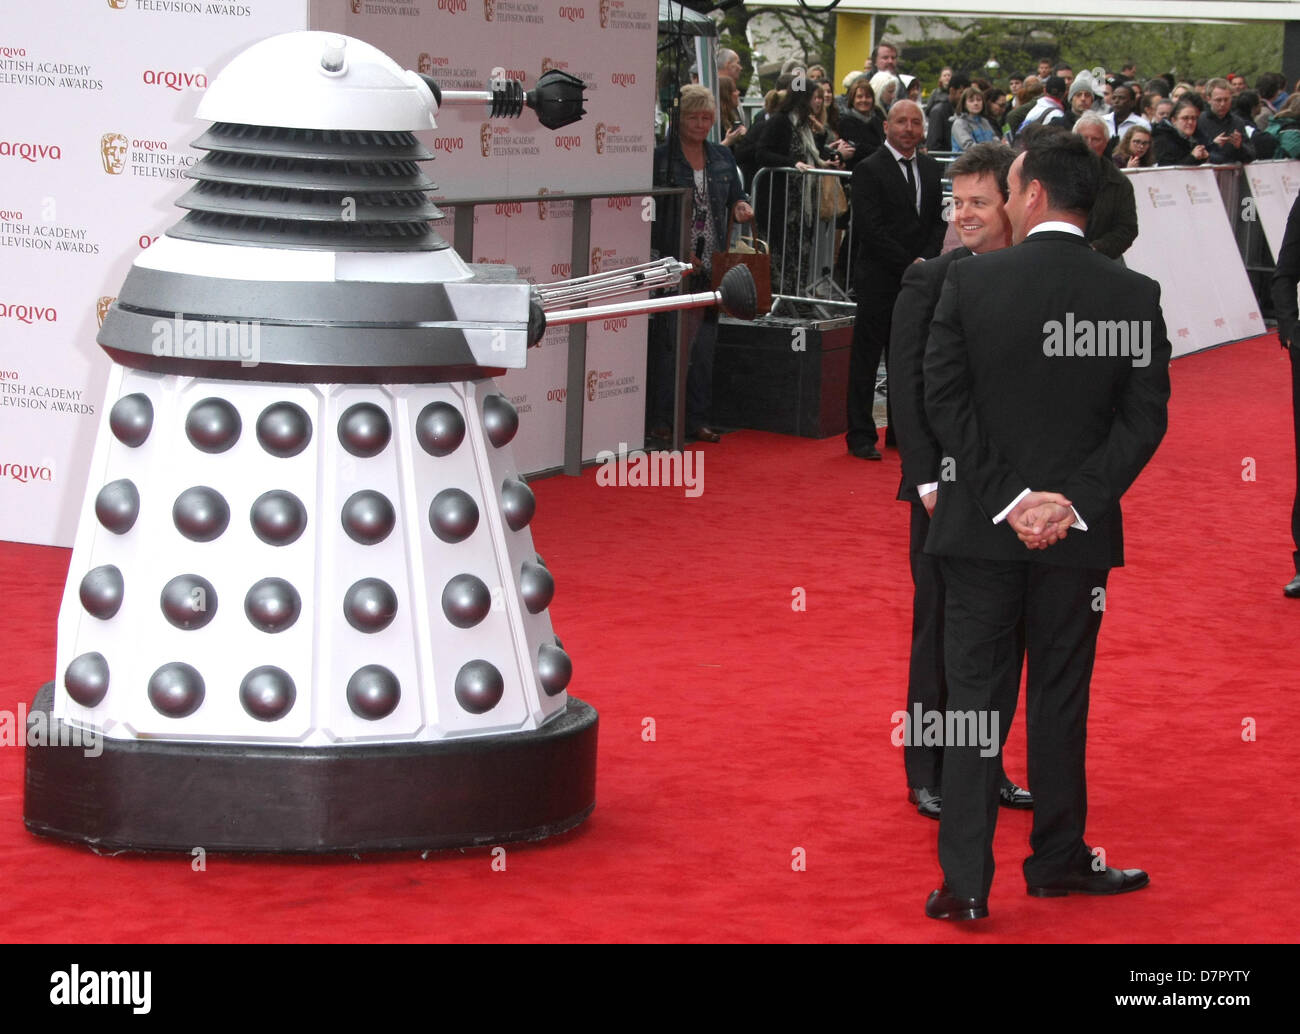 DALEK ANTHONY MCPARTLIN & DECLAN DONNELLY BRITISH ACADEMY TELEVISION AWARDS SOUTHBANK LONDON ENGLAND UK 12 May 2013 Stock Photo